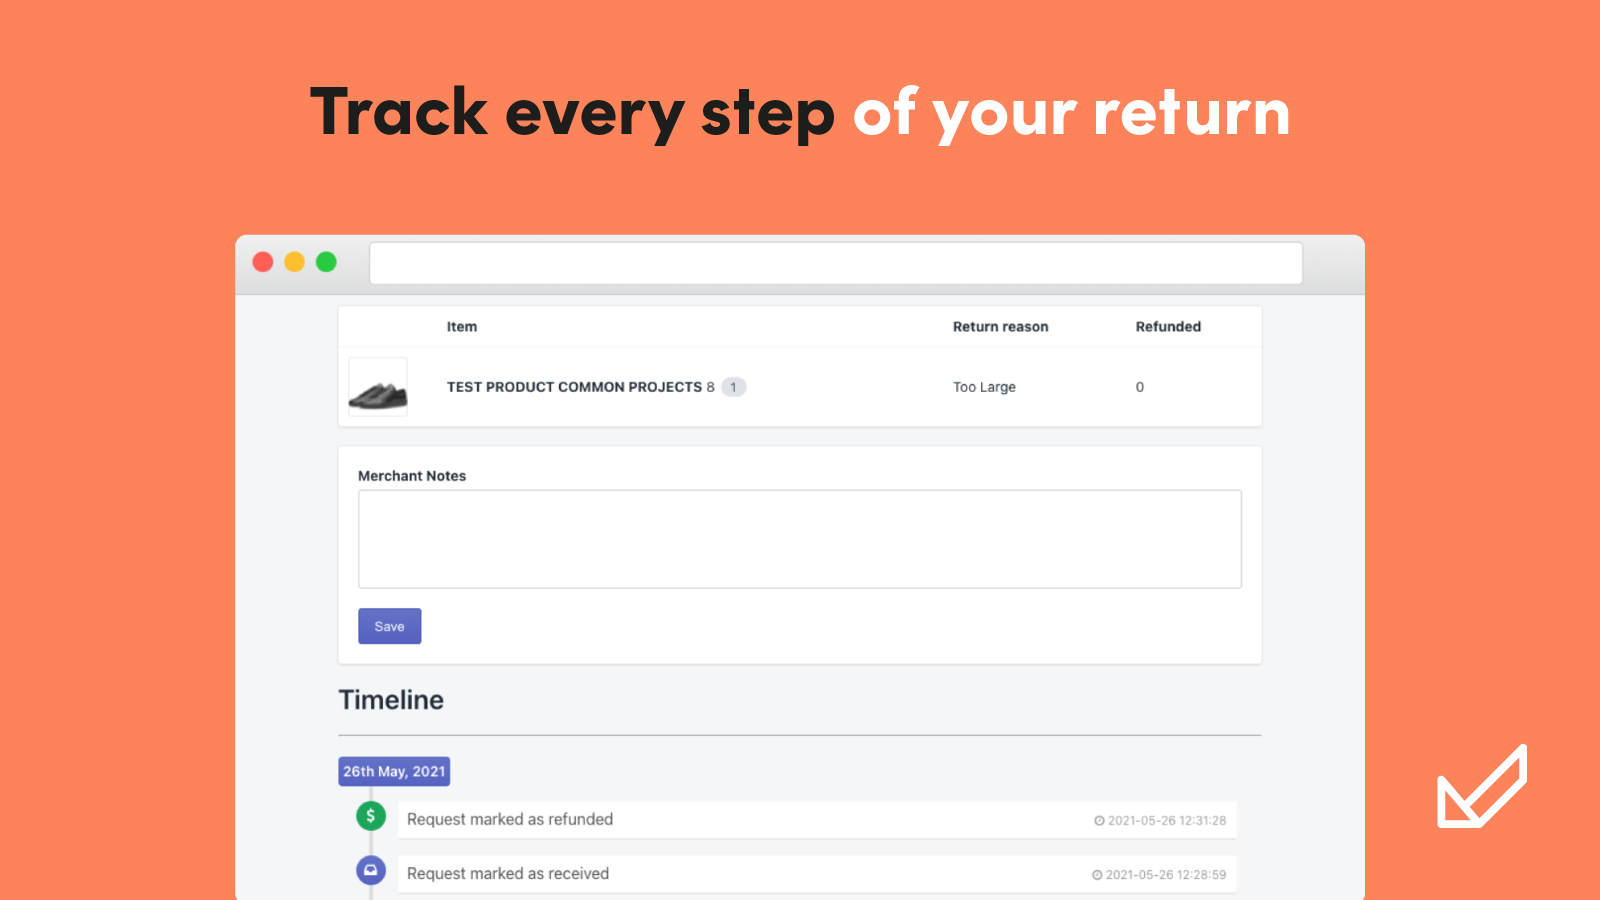 Track every step of your return